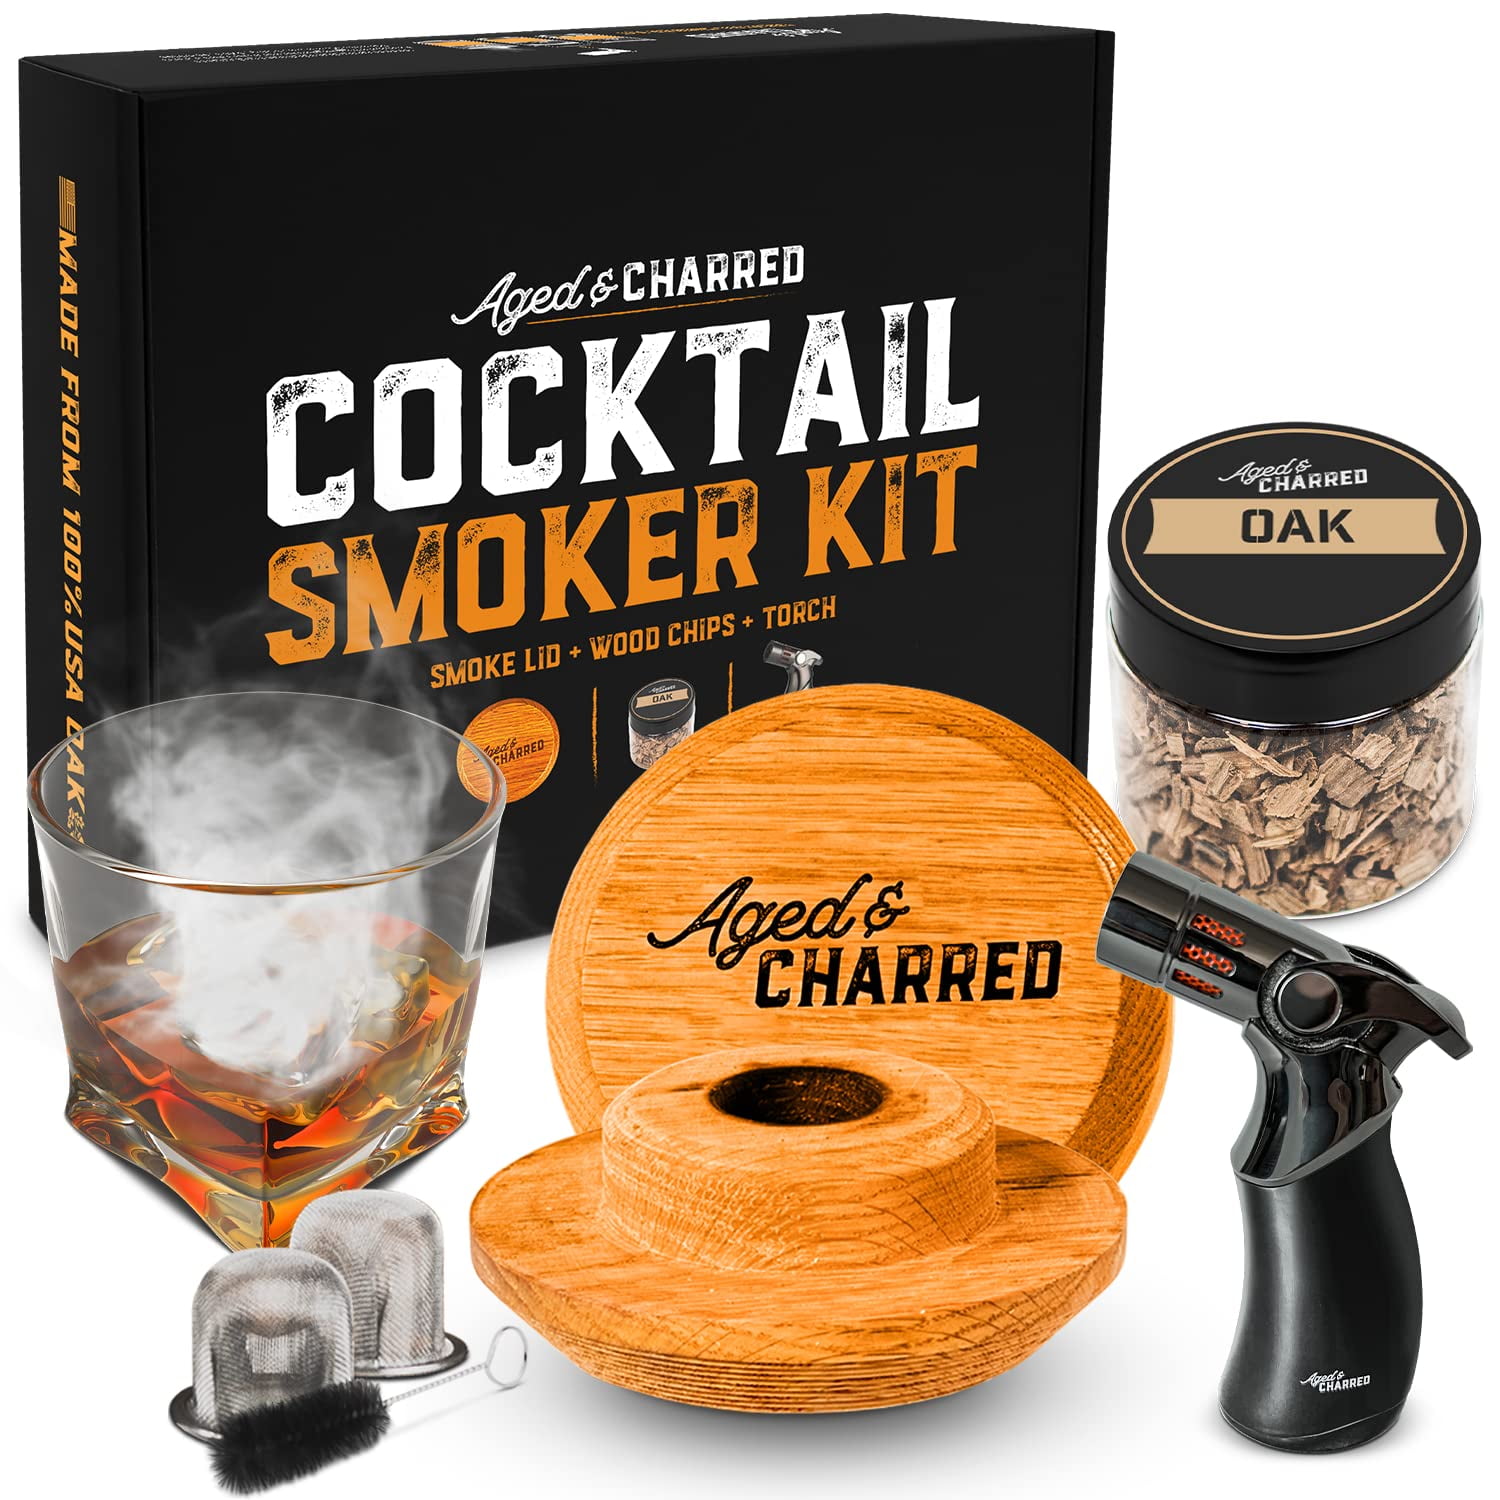 Cocktail Smoker Kit with Torch, 30pcs Wood Chips for Drink Smoker Infuser Kit, Bourbon/Whiskey Smoker Accessories, Old Fashioned Smoker Kit As Ideal